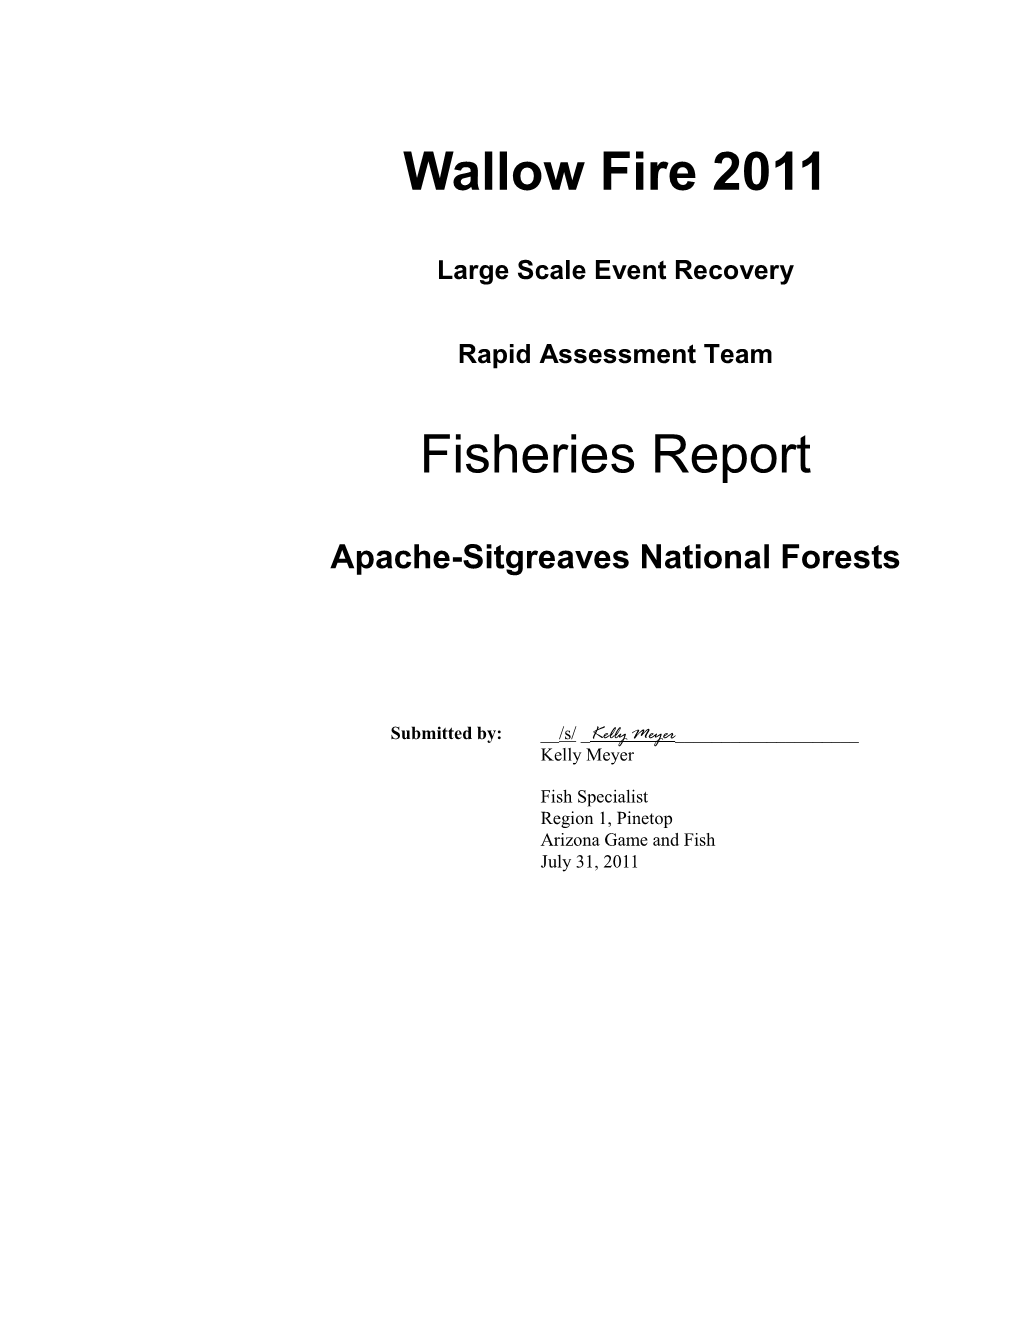 Wallow Fire 2011 Fisheries Report